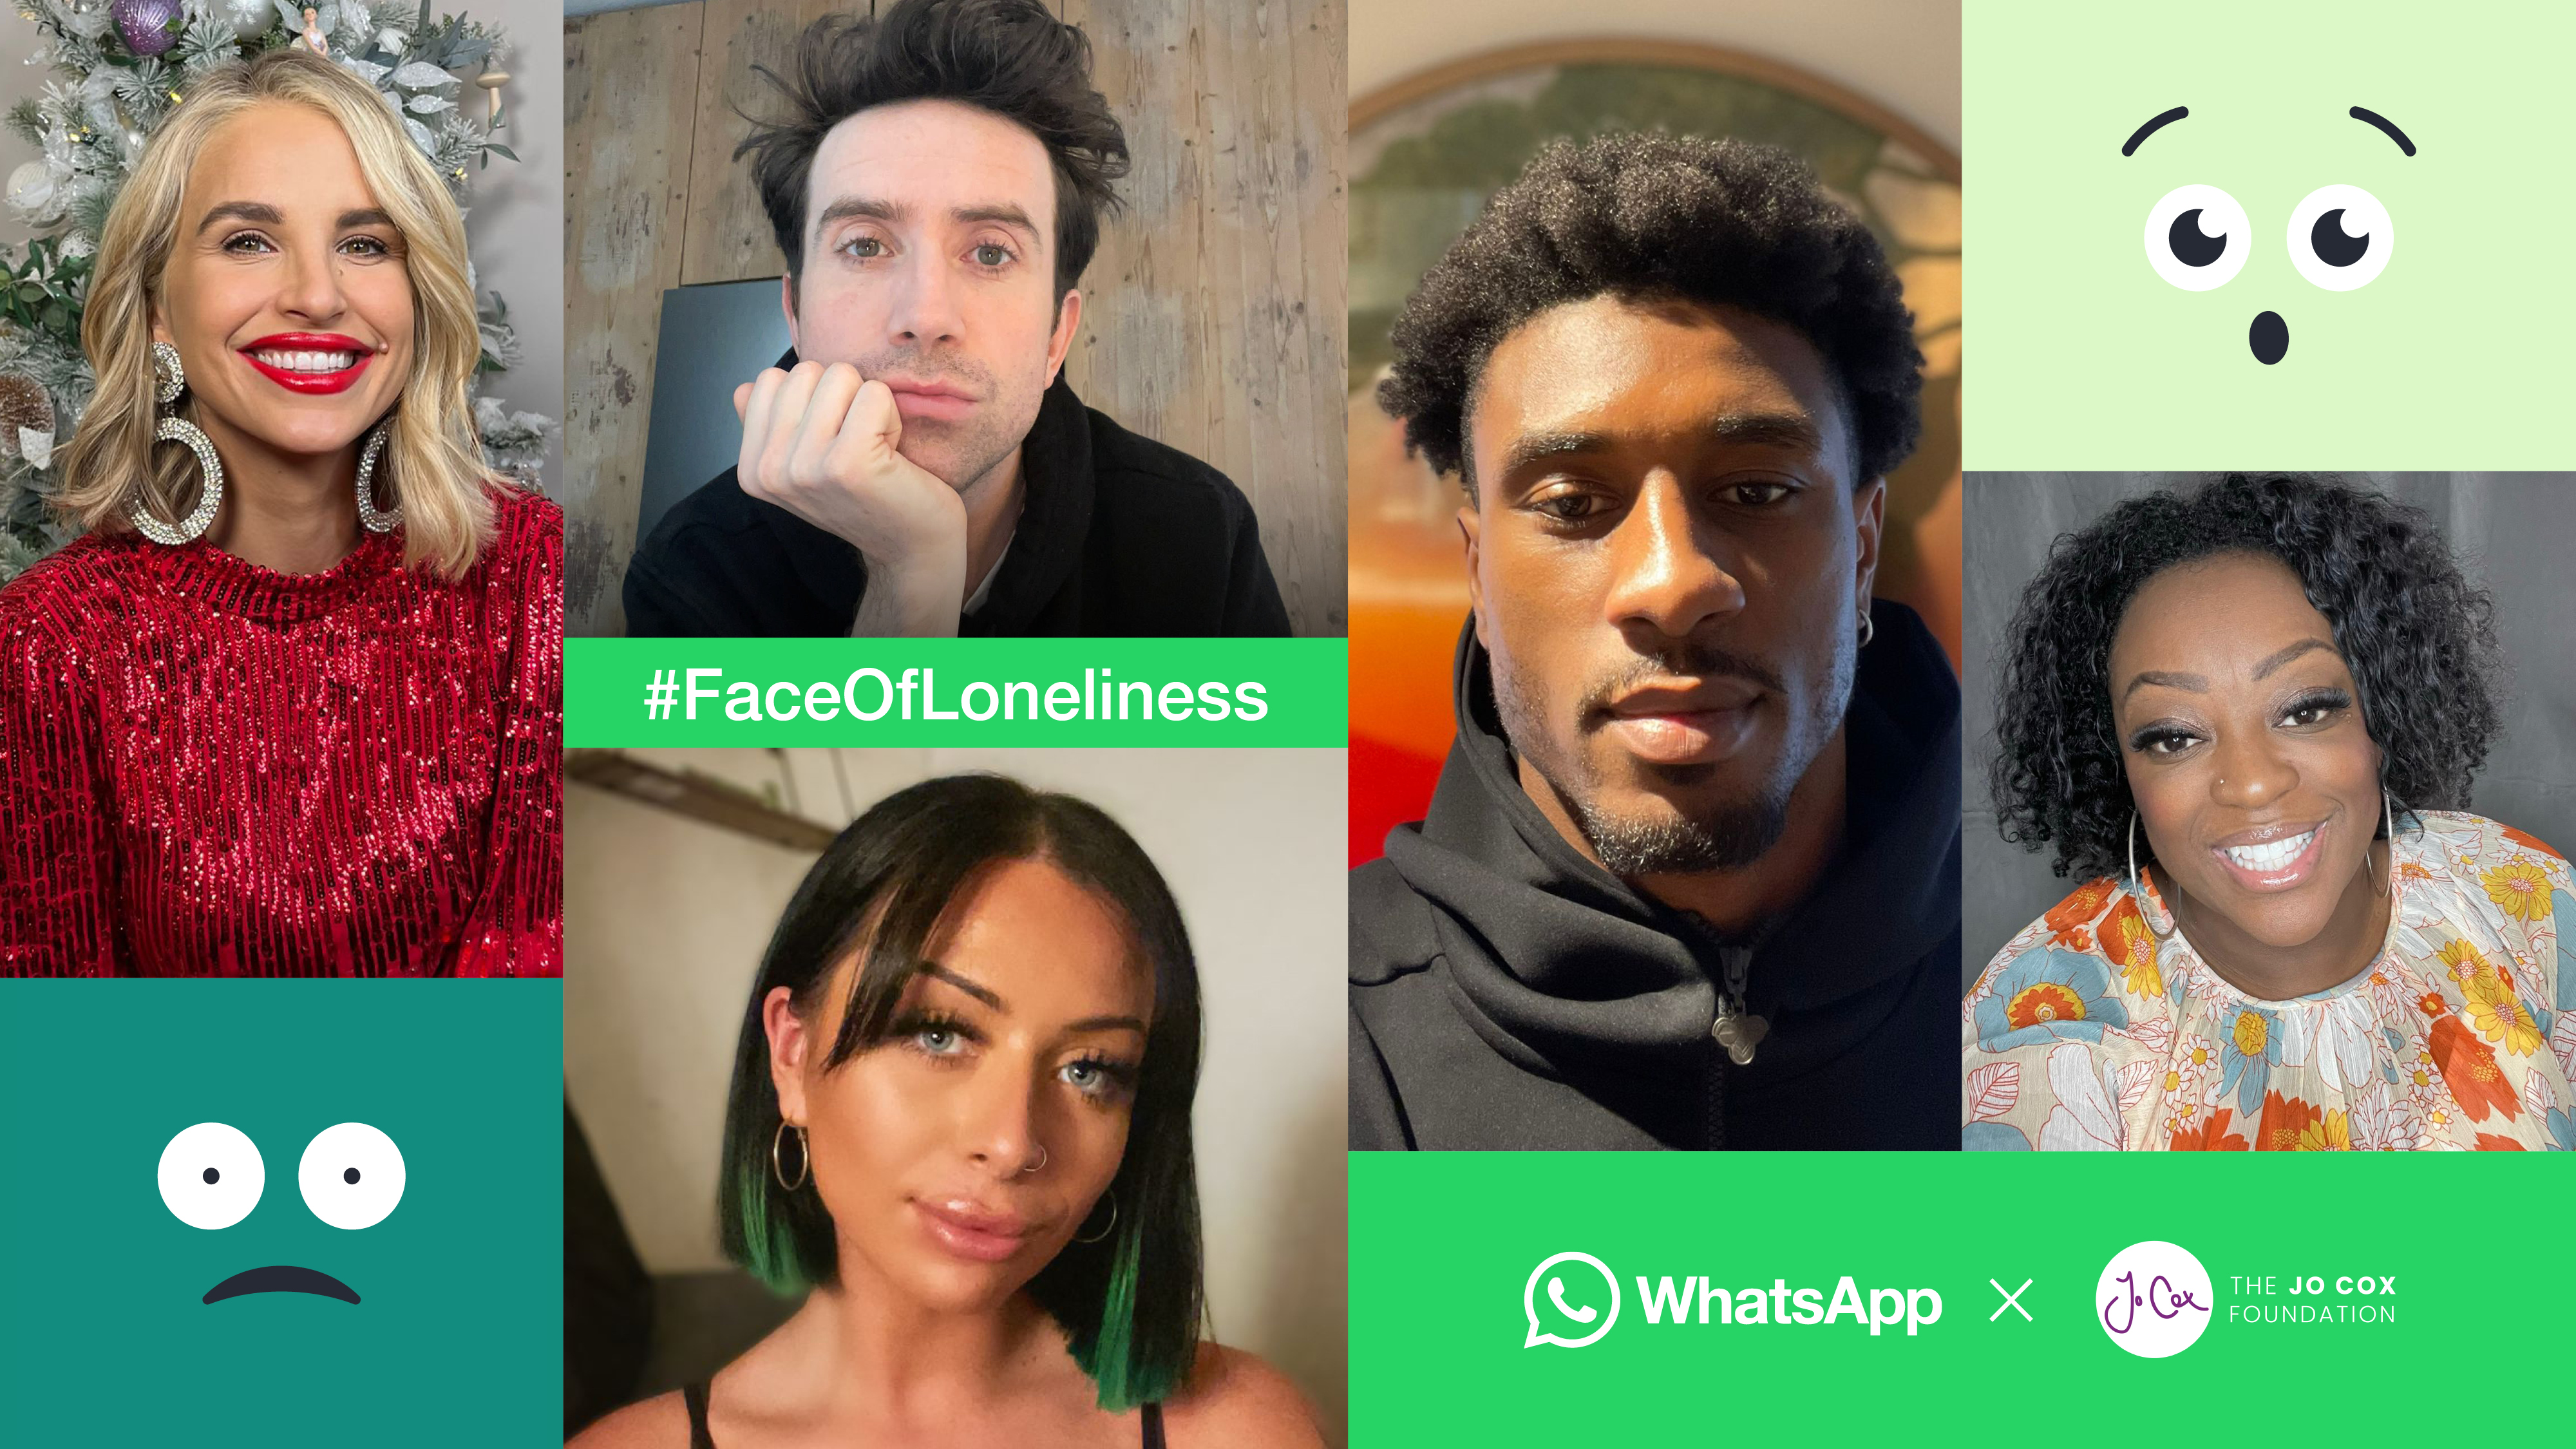 Faces of four influencers of the #FaceOfLoneliness campaign